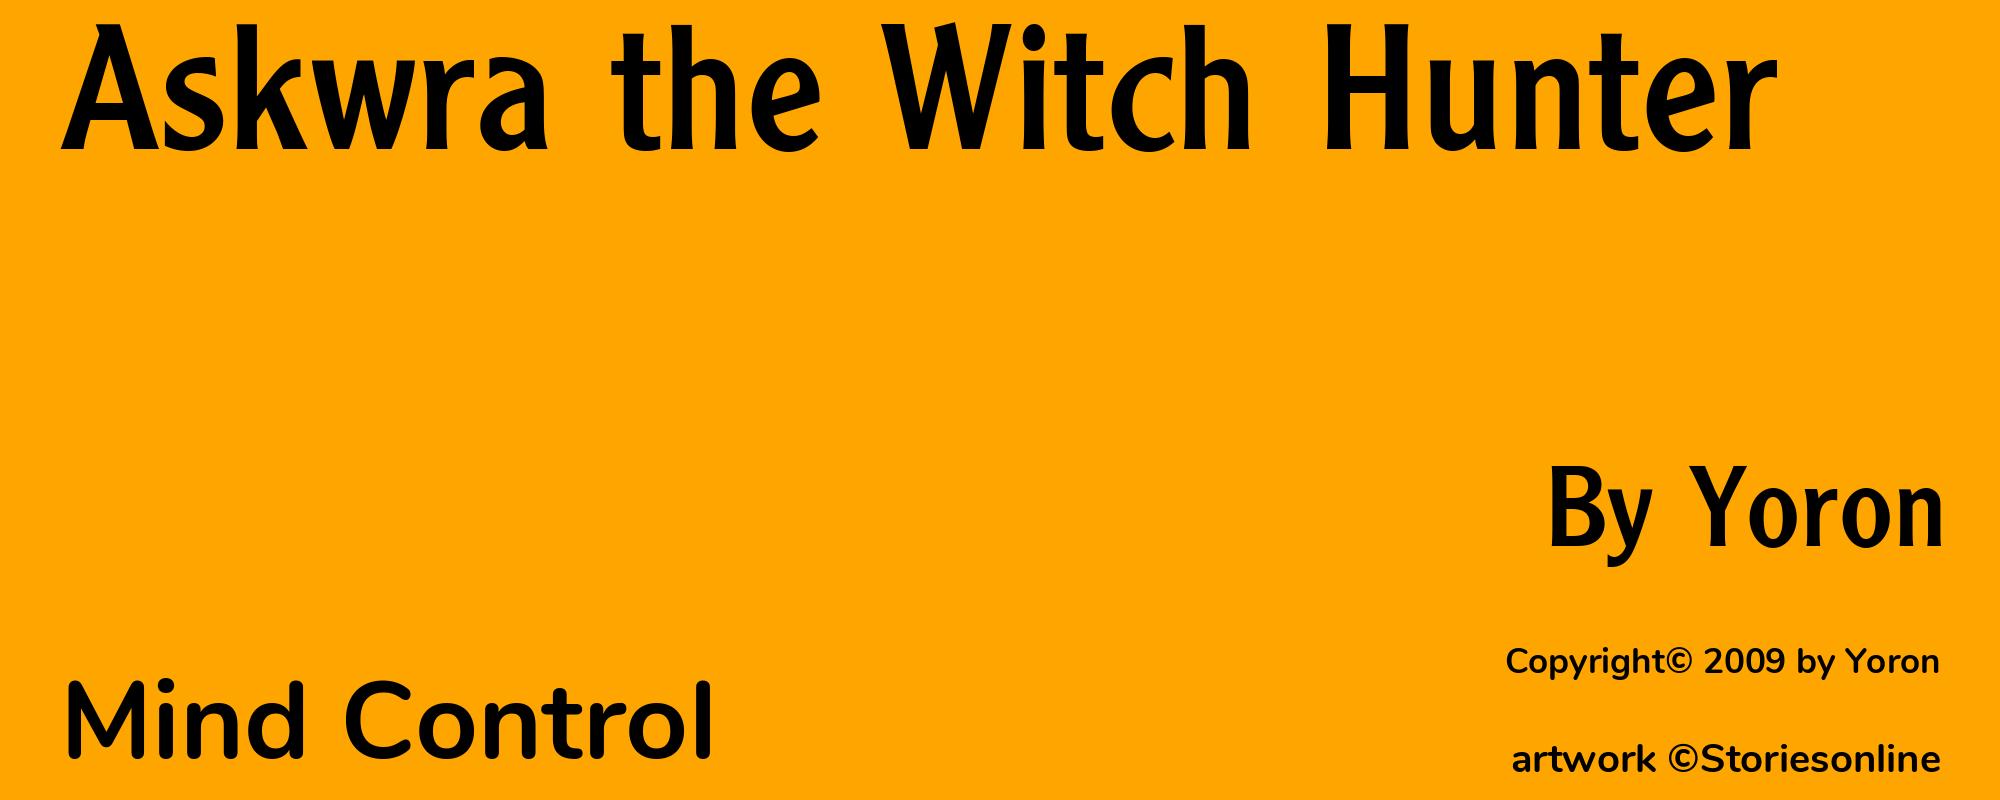 Askwra the Witch Hunter - Cover